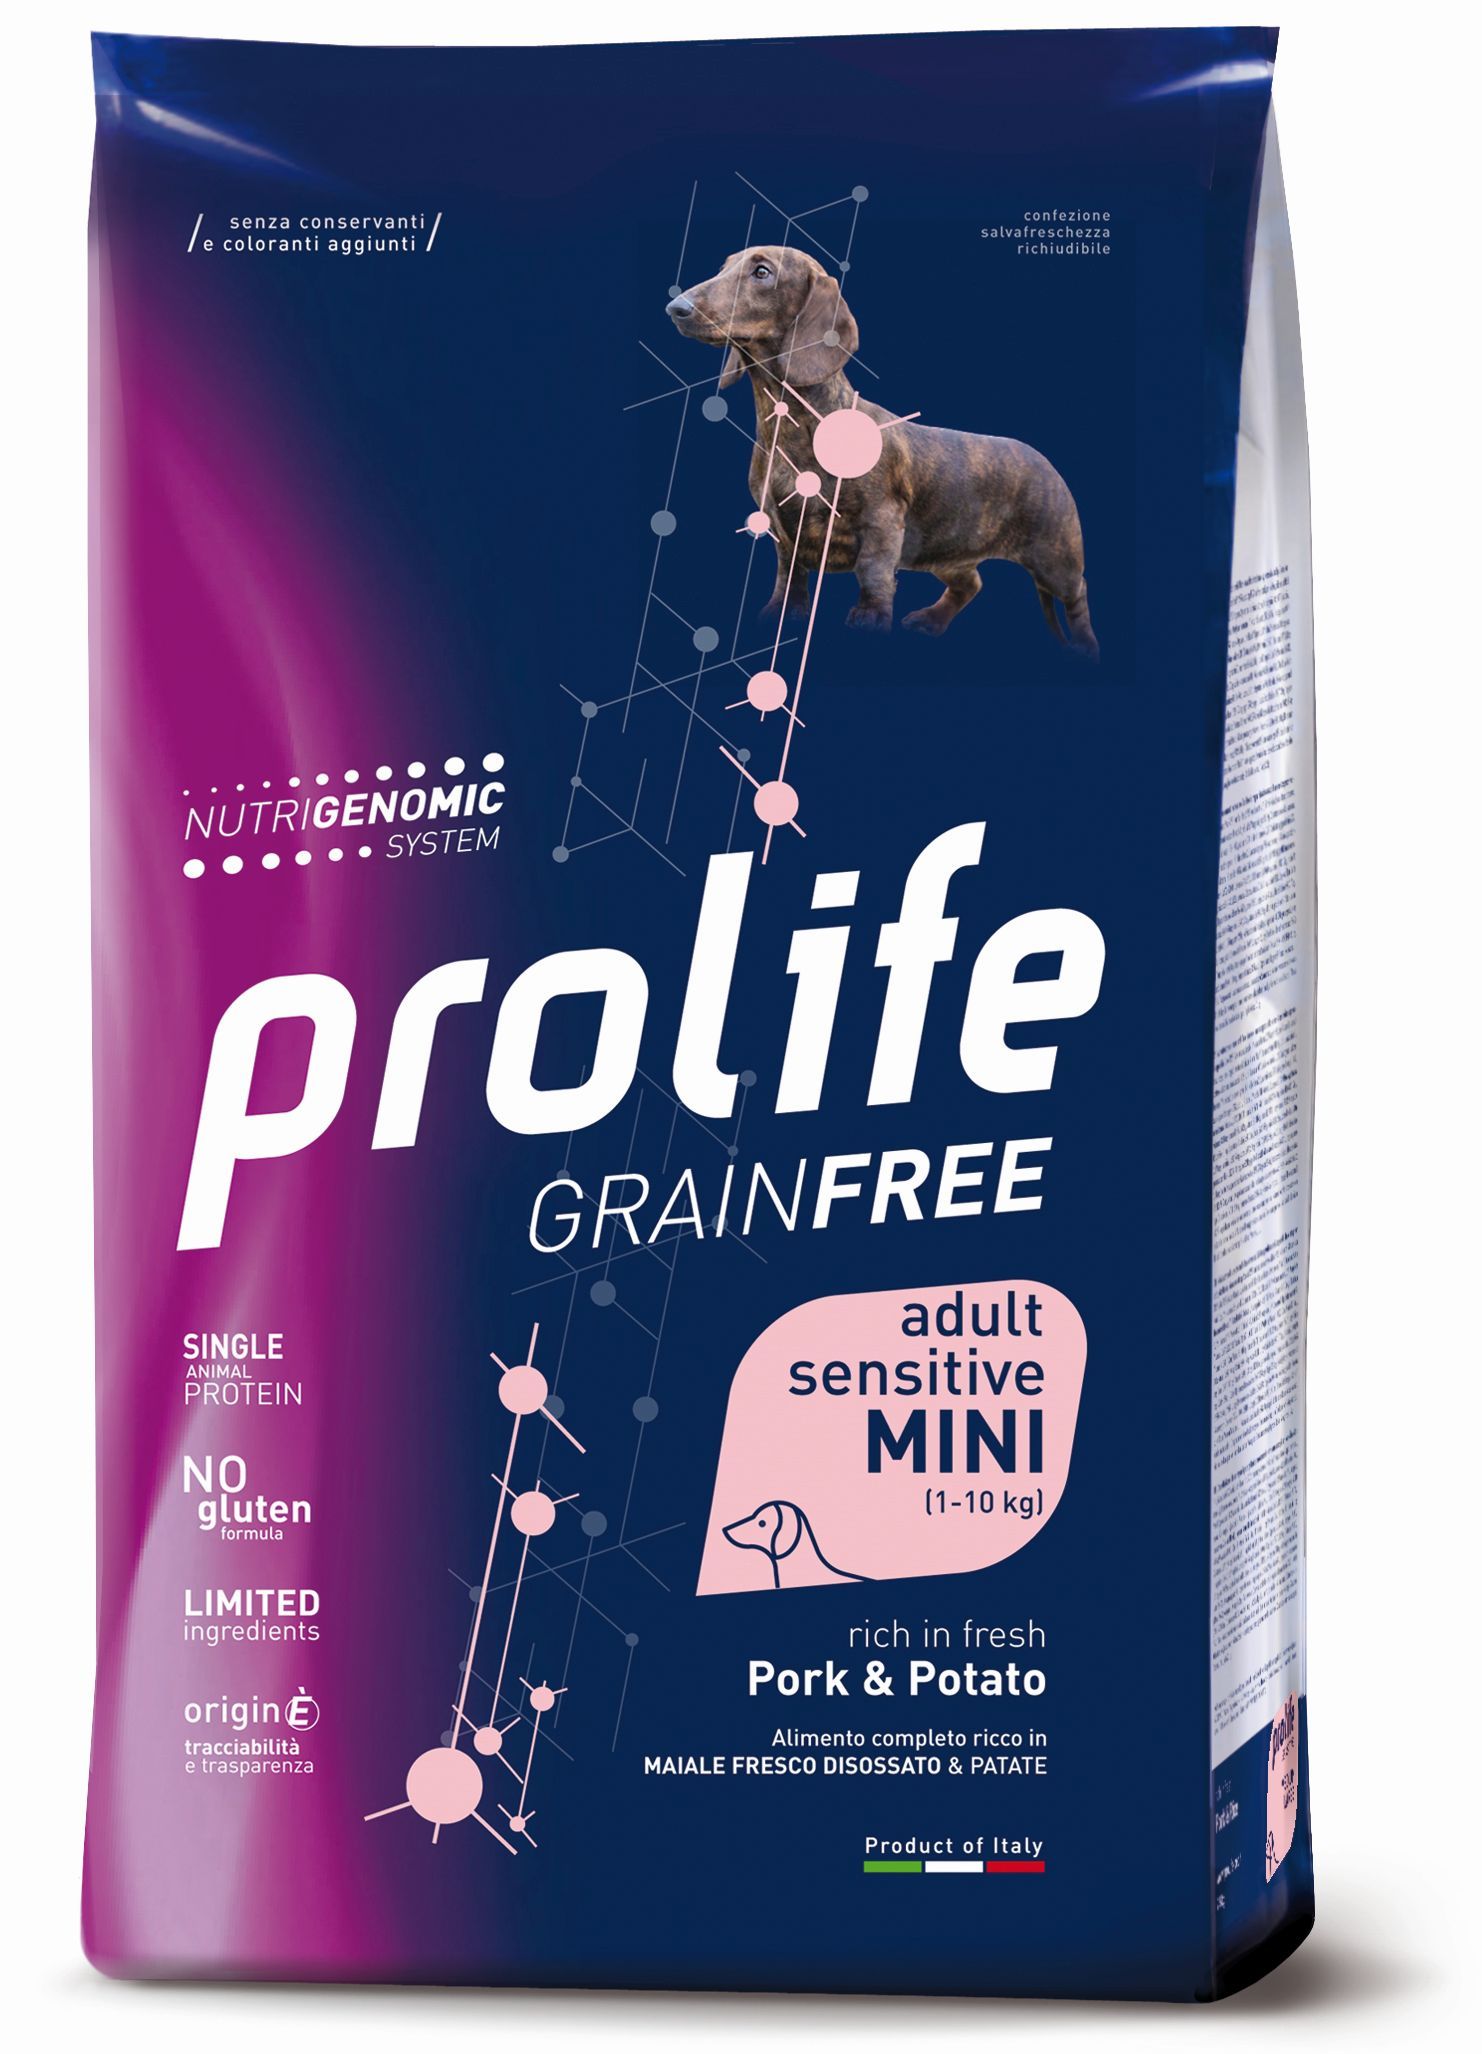 Complete pet food, rich in fresh deboned sole fish and potatoes for adult dogs.
